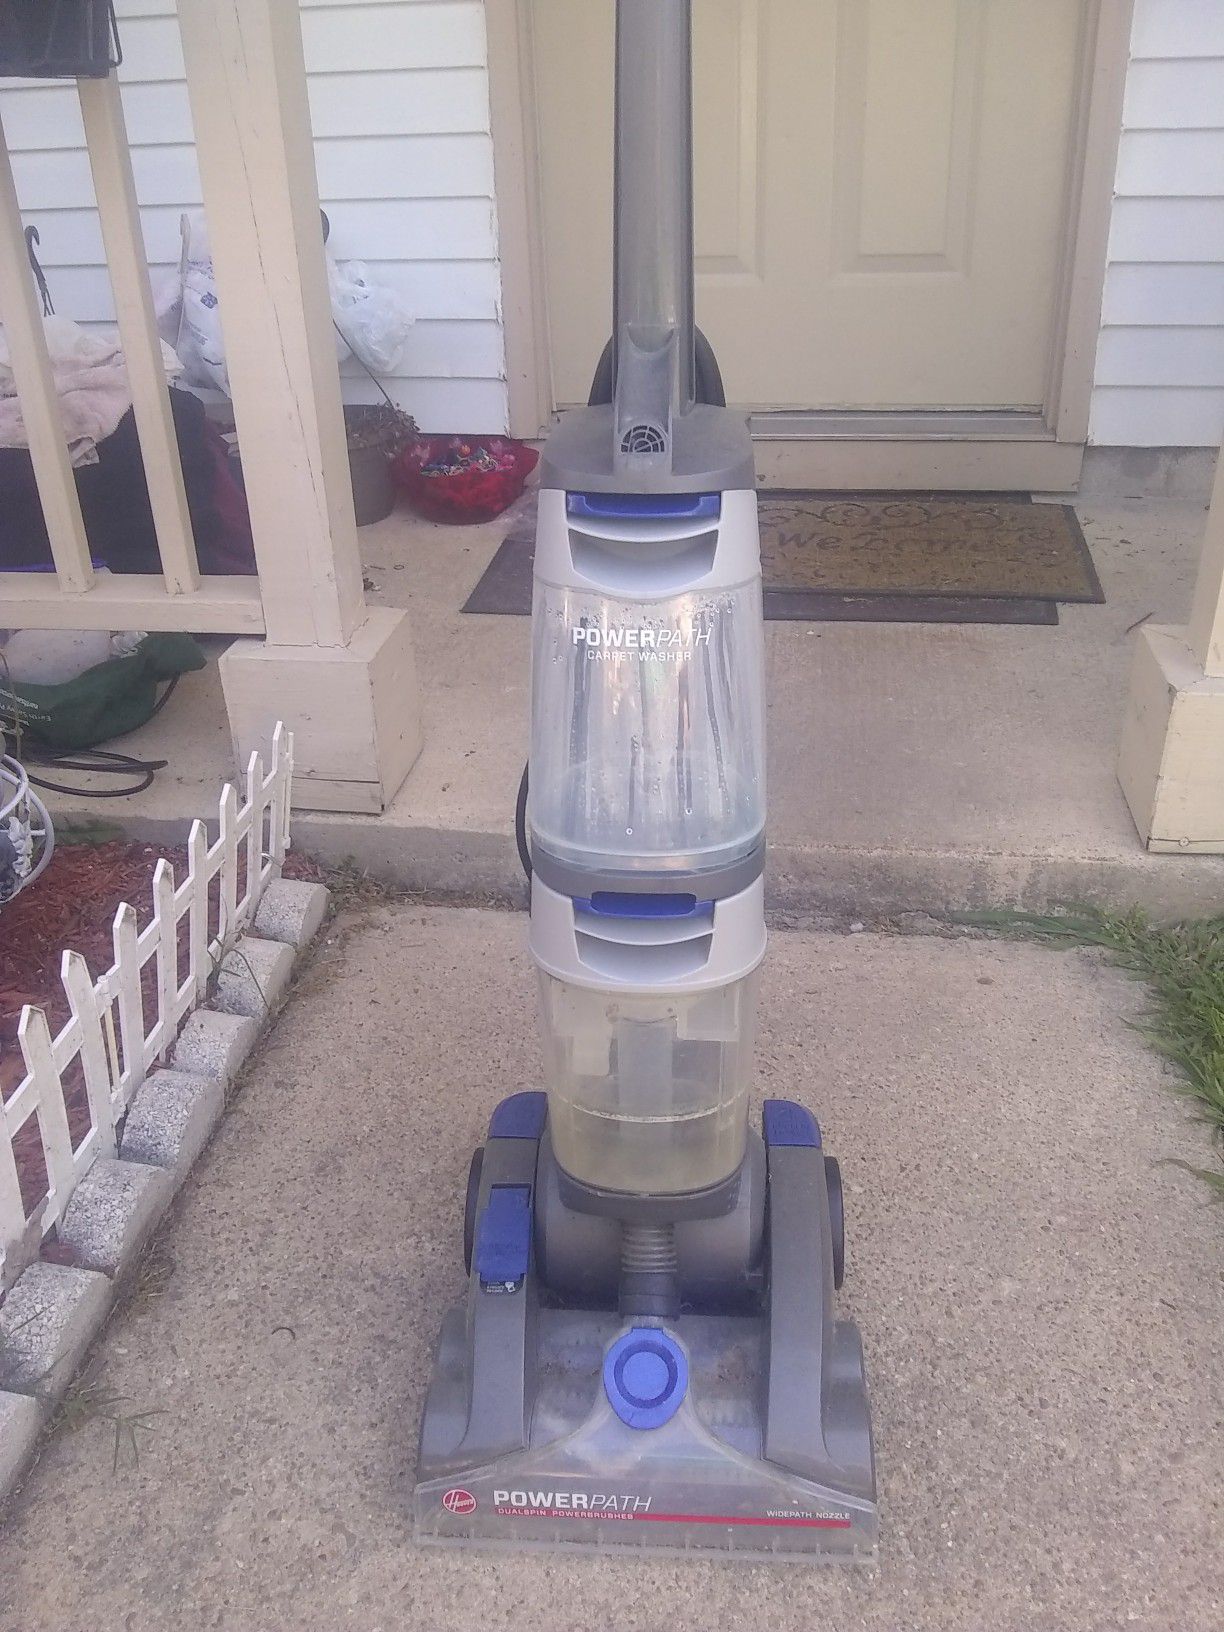 HOOVER POWER PATH CARPET WASHER